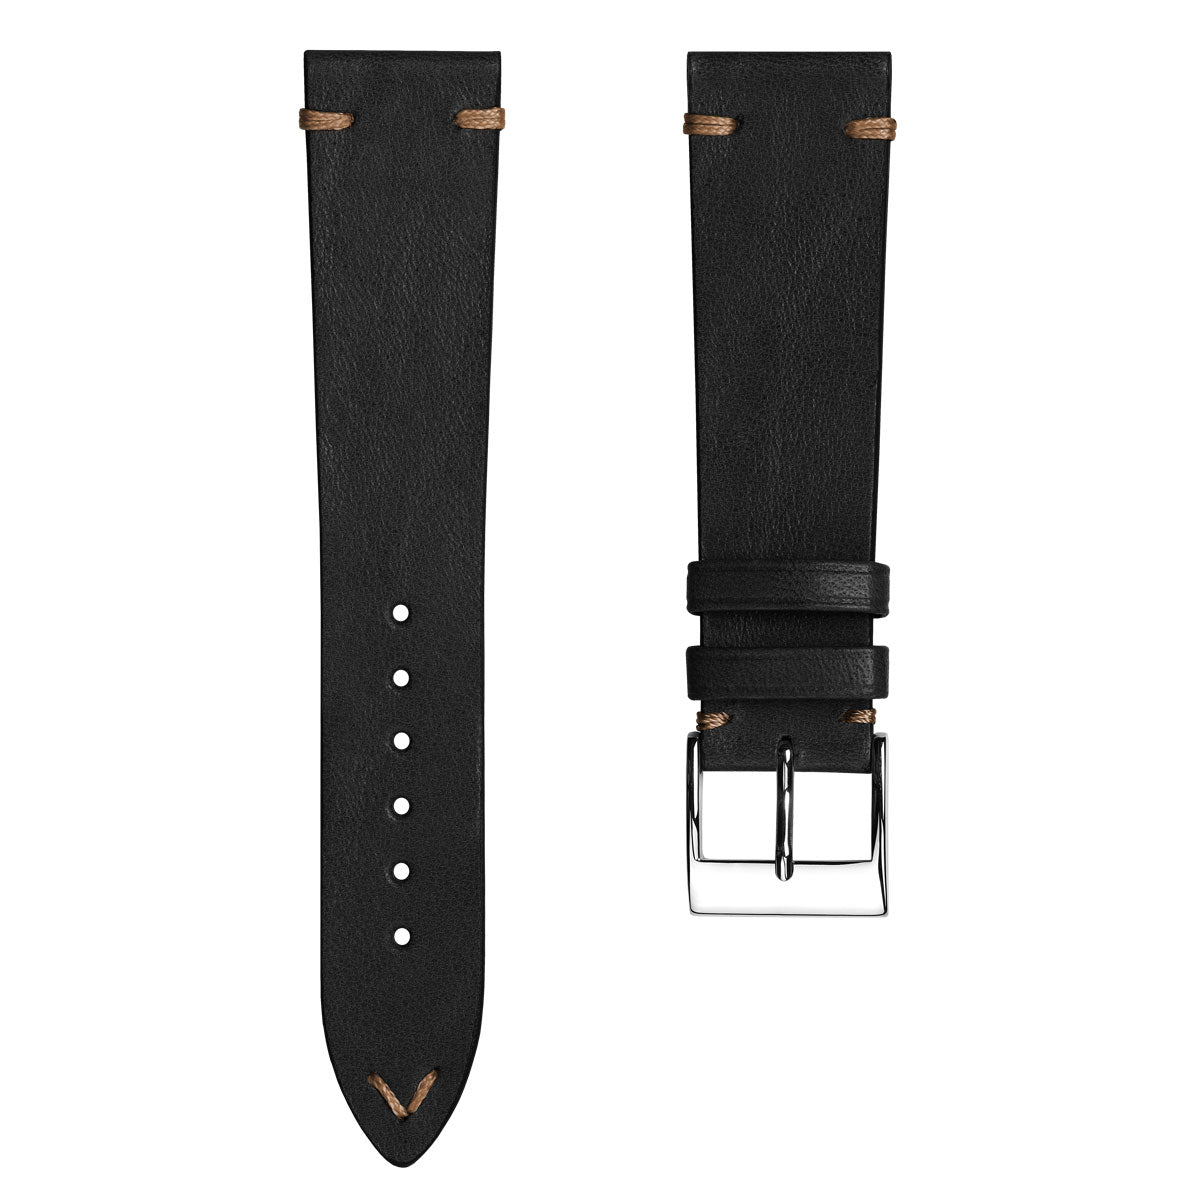 Vintage Cavallo Horse Leather Watch Strap - Chocolate Brown